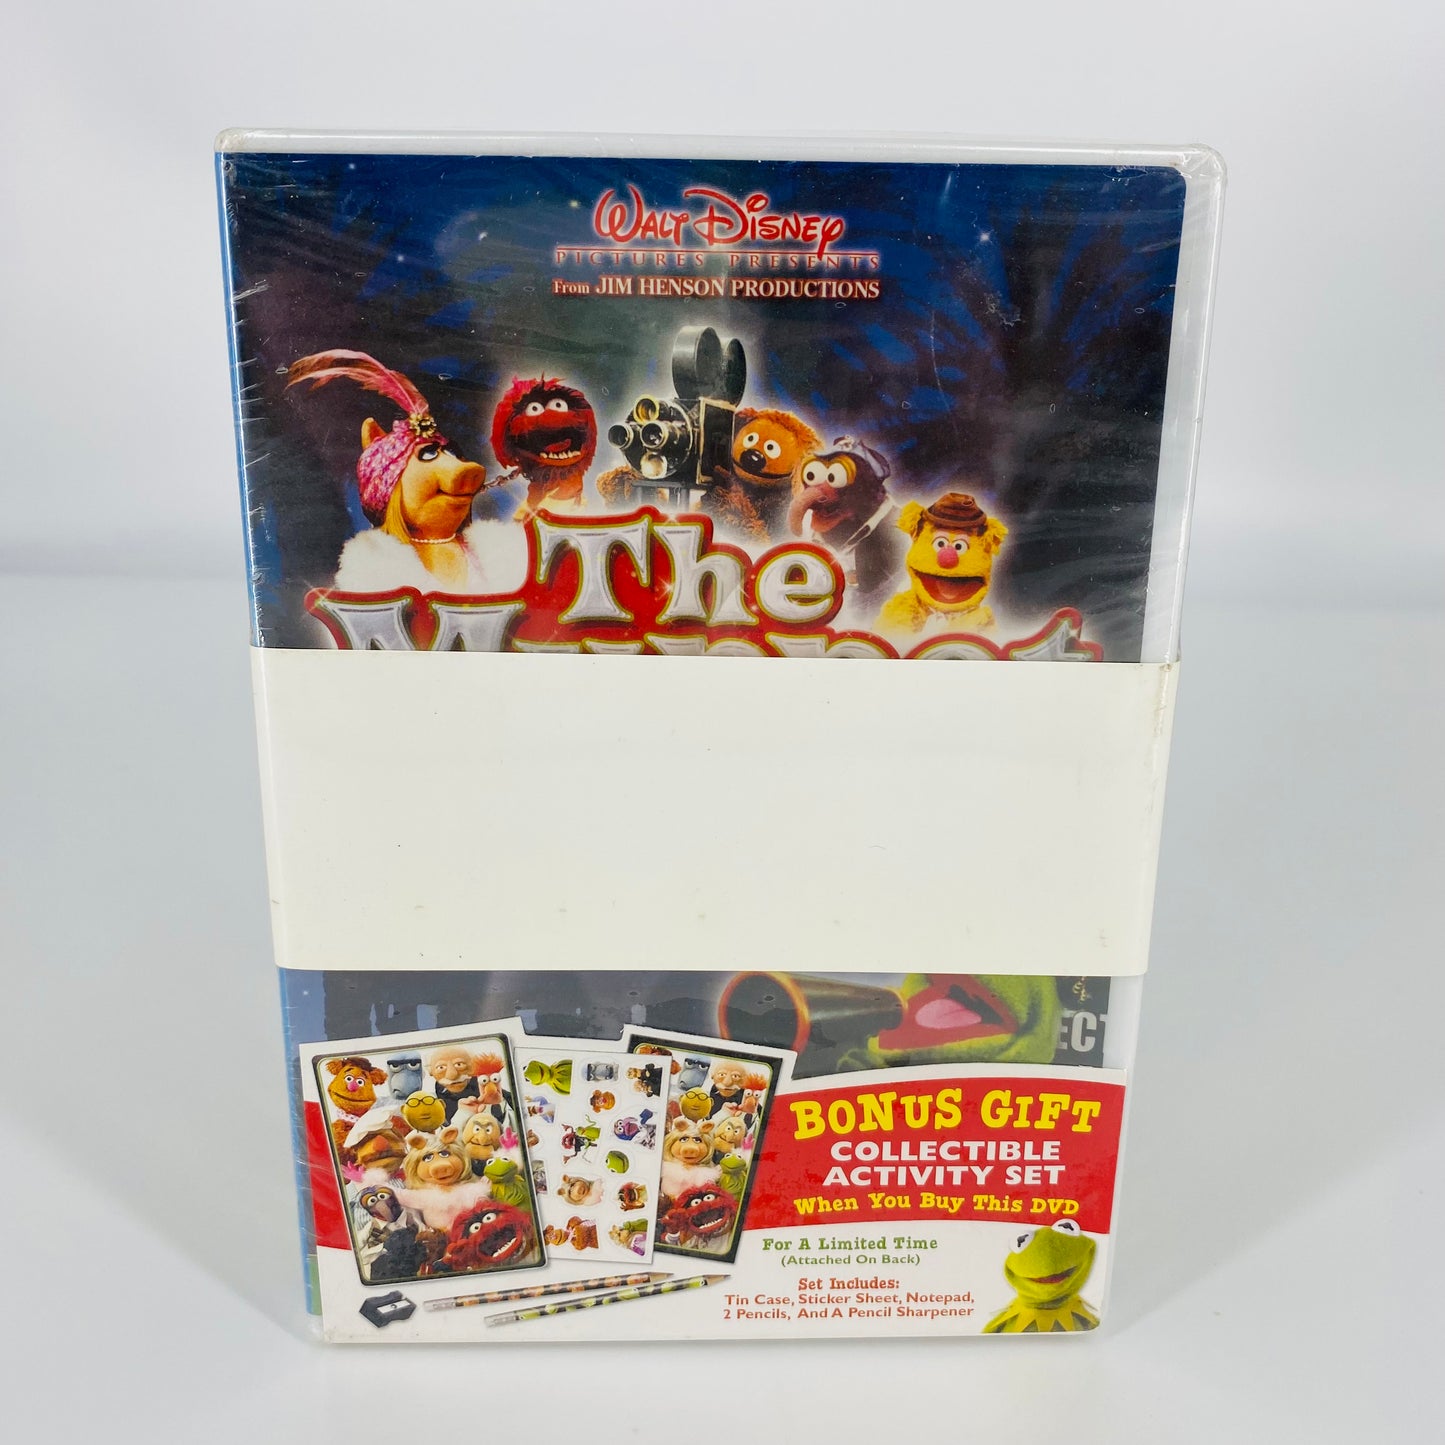 The Muppet Movie, Muppet Treasure Island & The Muppet Show Seasons 1-3 DVD's, 2 activity sets, 2 tin cases, 1 sticker sheet, 1 notepad, 2 pencils, and 1 pencil sharpener